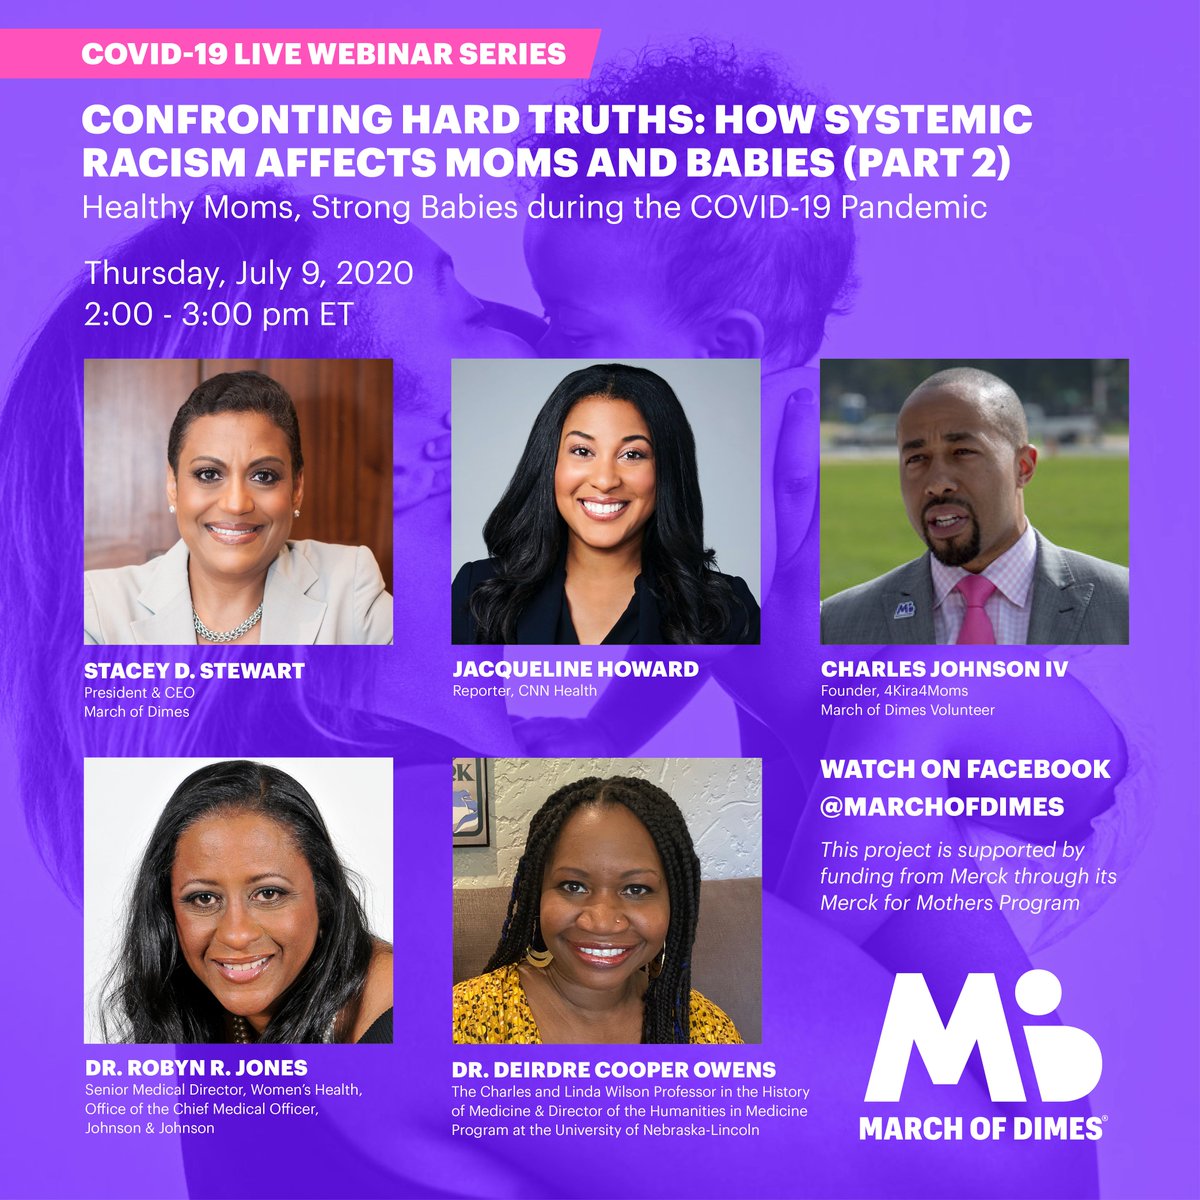 Join us on July 9 at 2pm ET for the next Health Moms, Strong Babies Facebook Live event: “Confronting Hard Truths: How Systemic Racism Affects Moms and Babies (Part 2).” Visit the March of Dimes Facebook page to watch and join in the conversation.